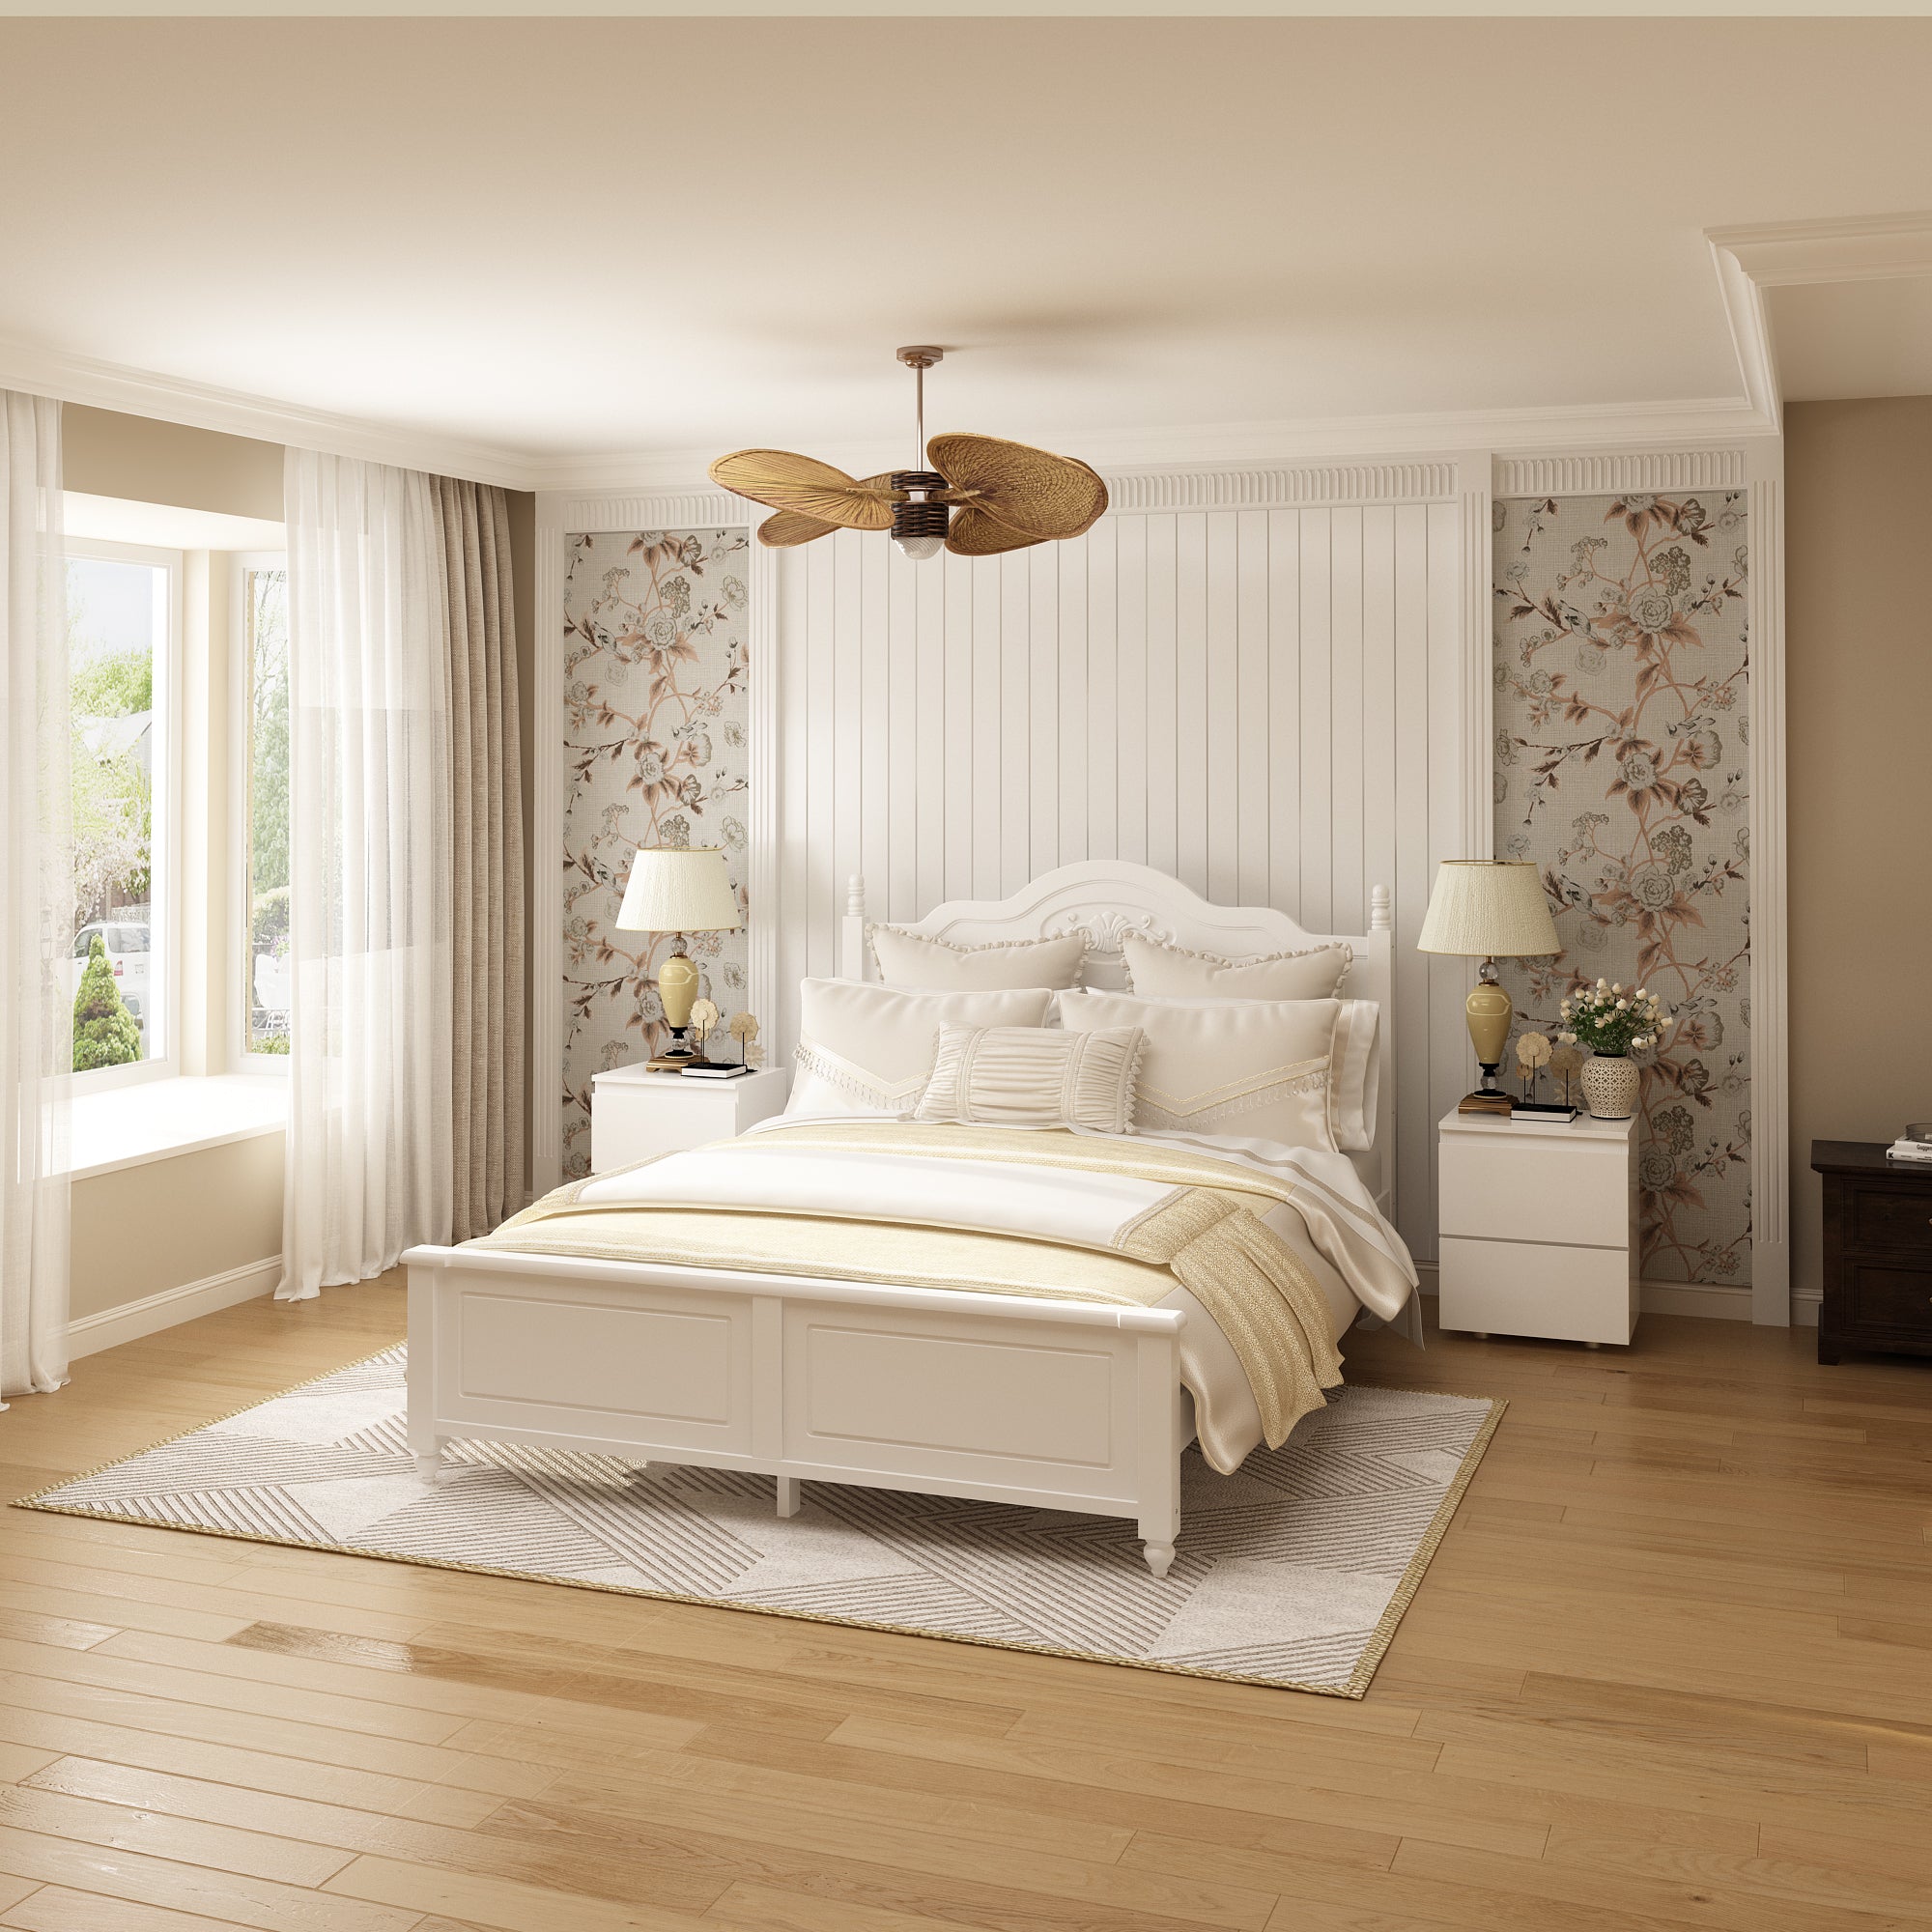 Shop This Bedroom Furniture